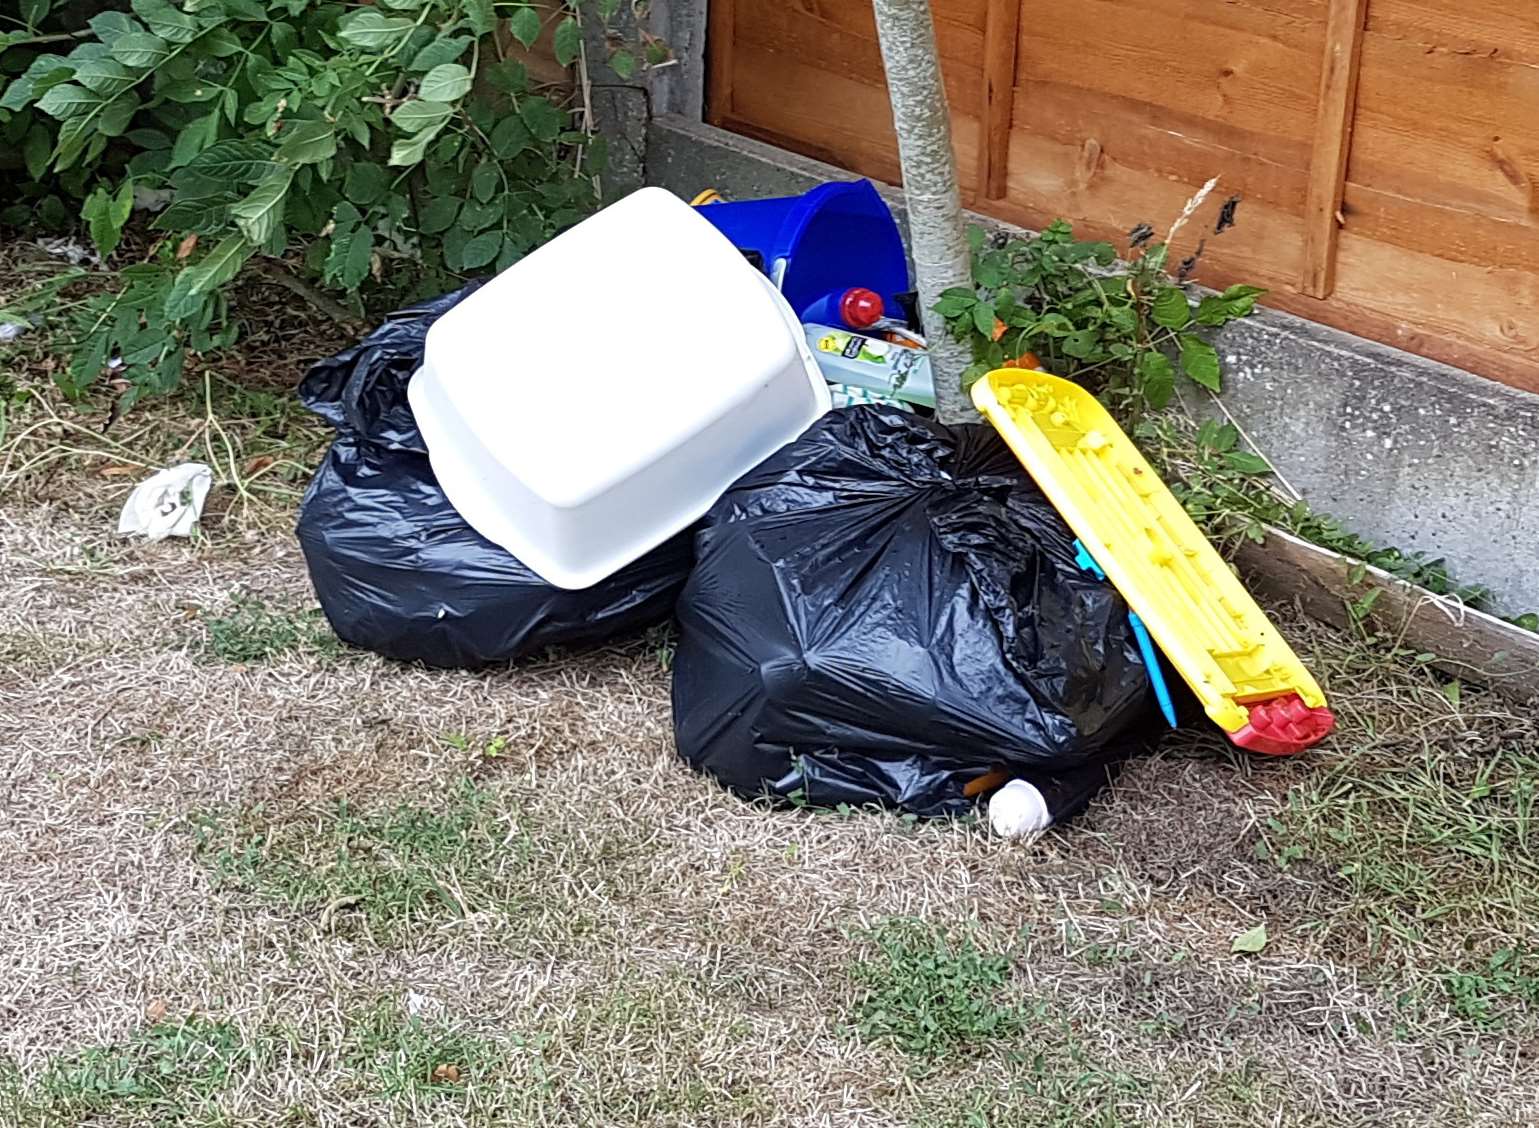 Mess left by travellers outside Cookham Wood